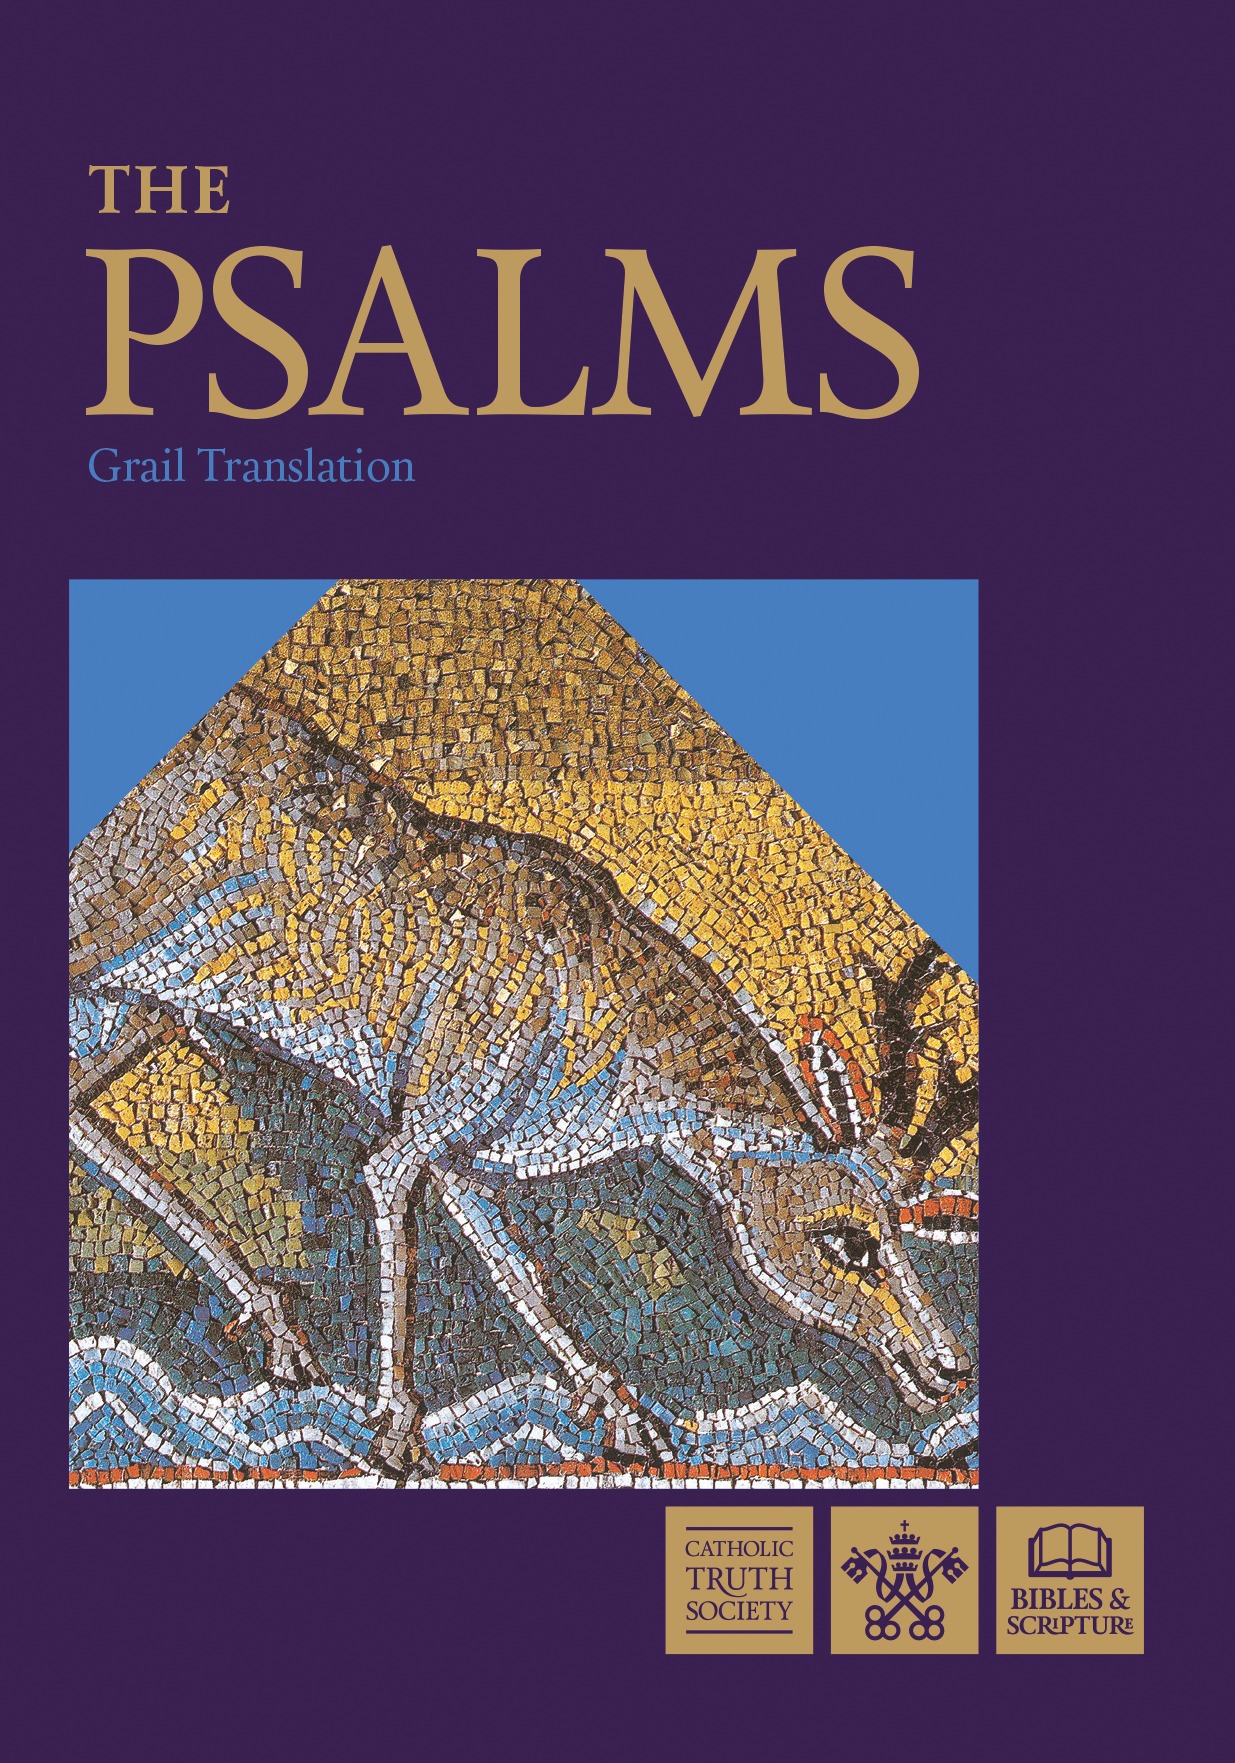 What Are The Books Of The Psalms